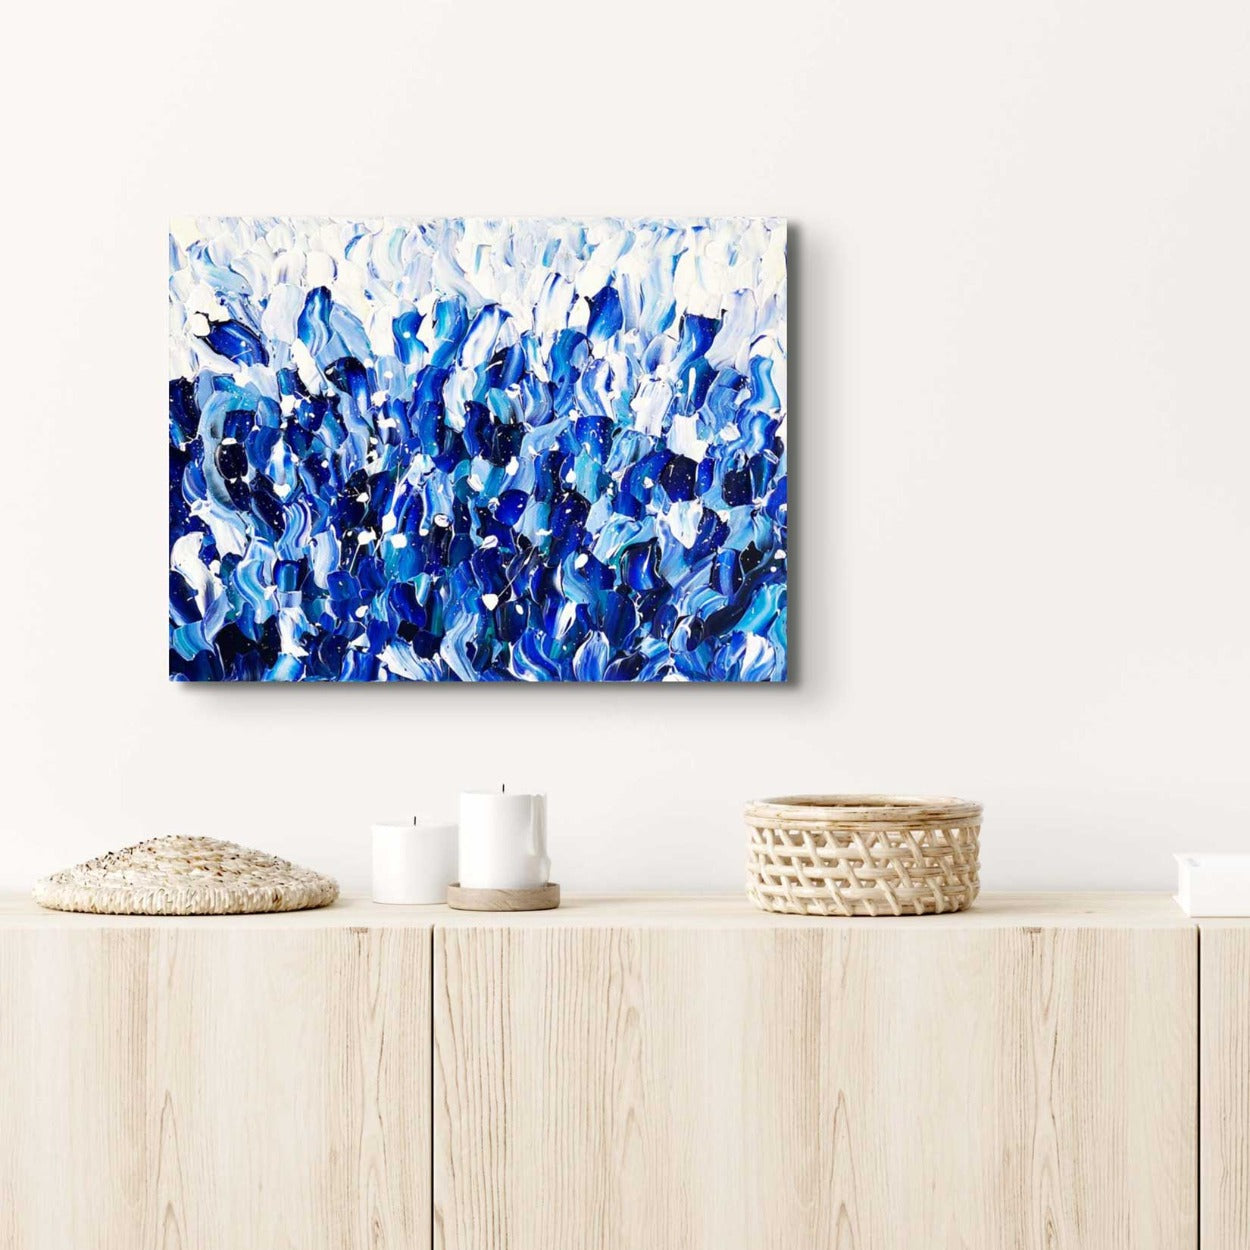 Sea of Blue, textured abstract canvas art in relaxing blues and whites seen hanging in modern setting. Original artwork by Bridget Bradley